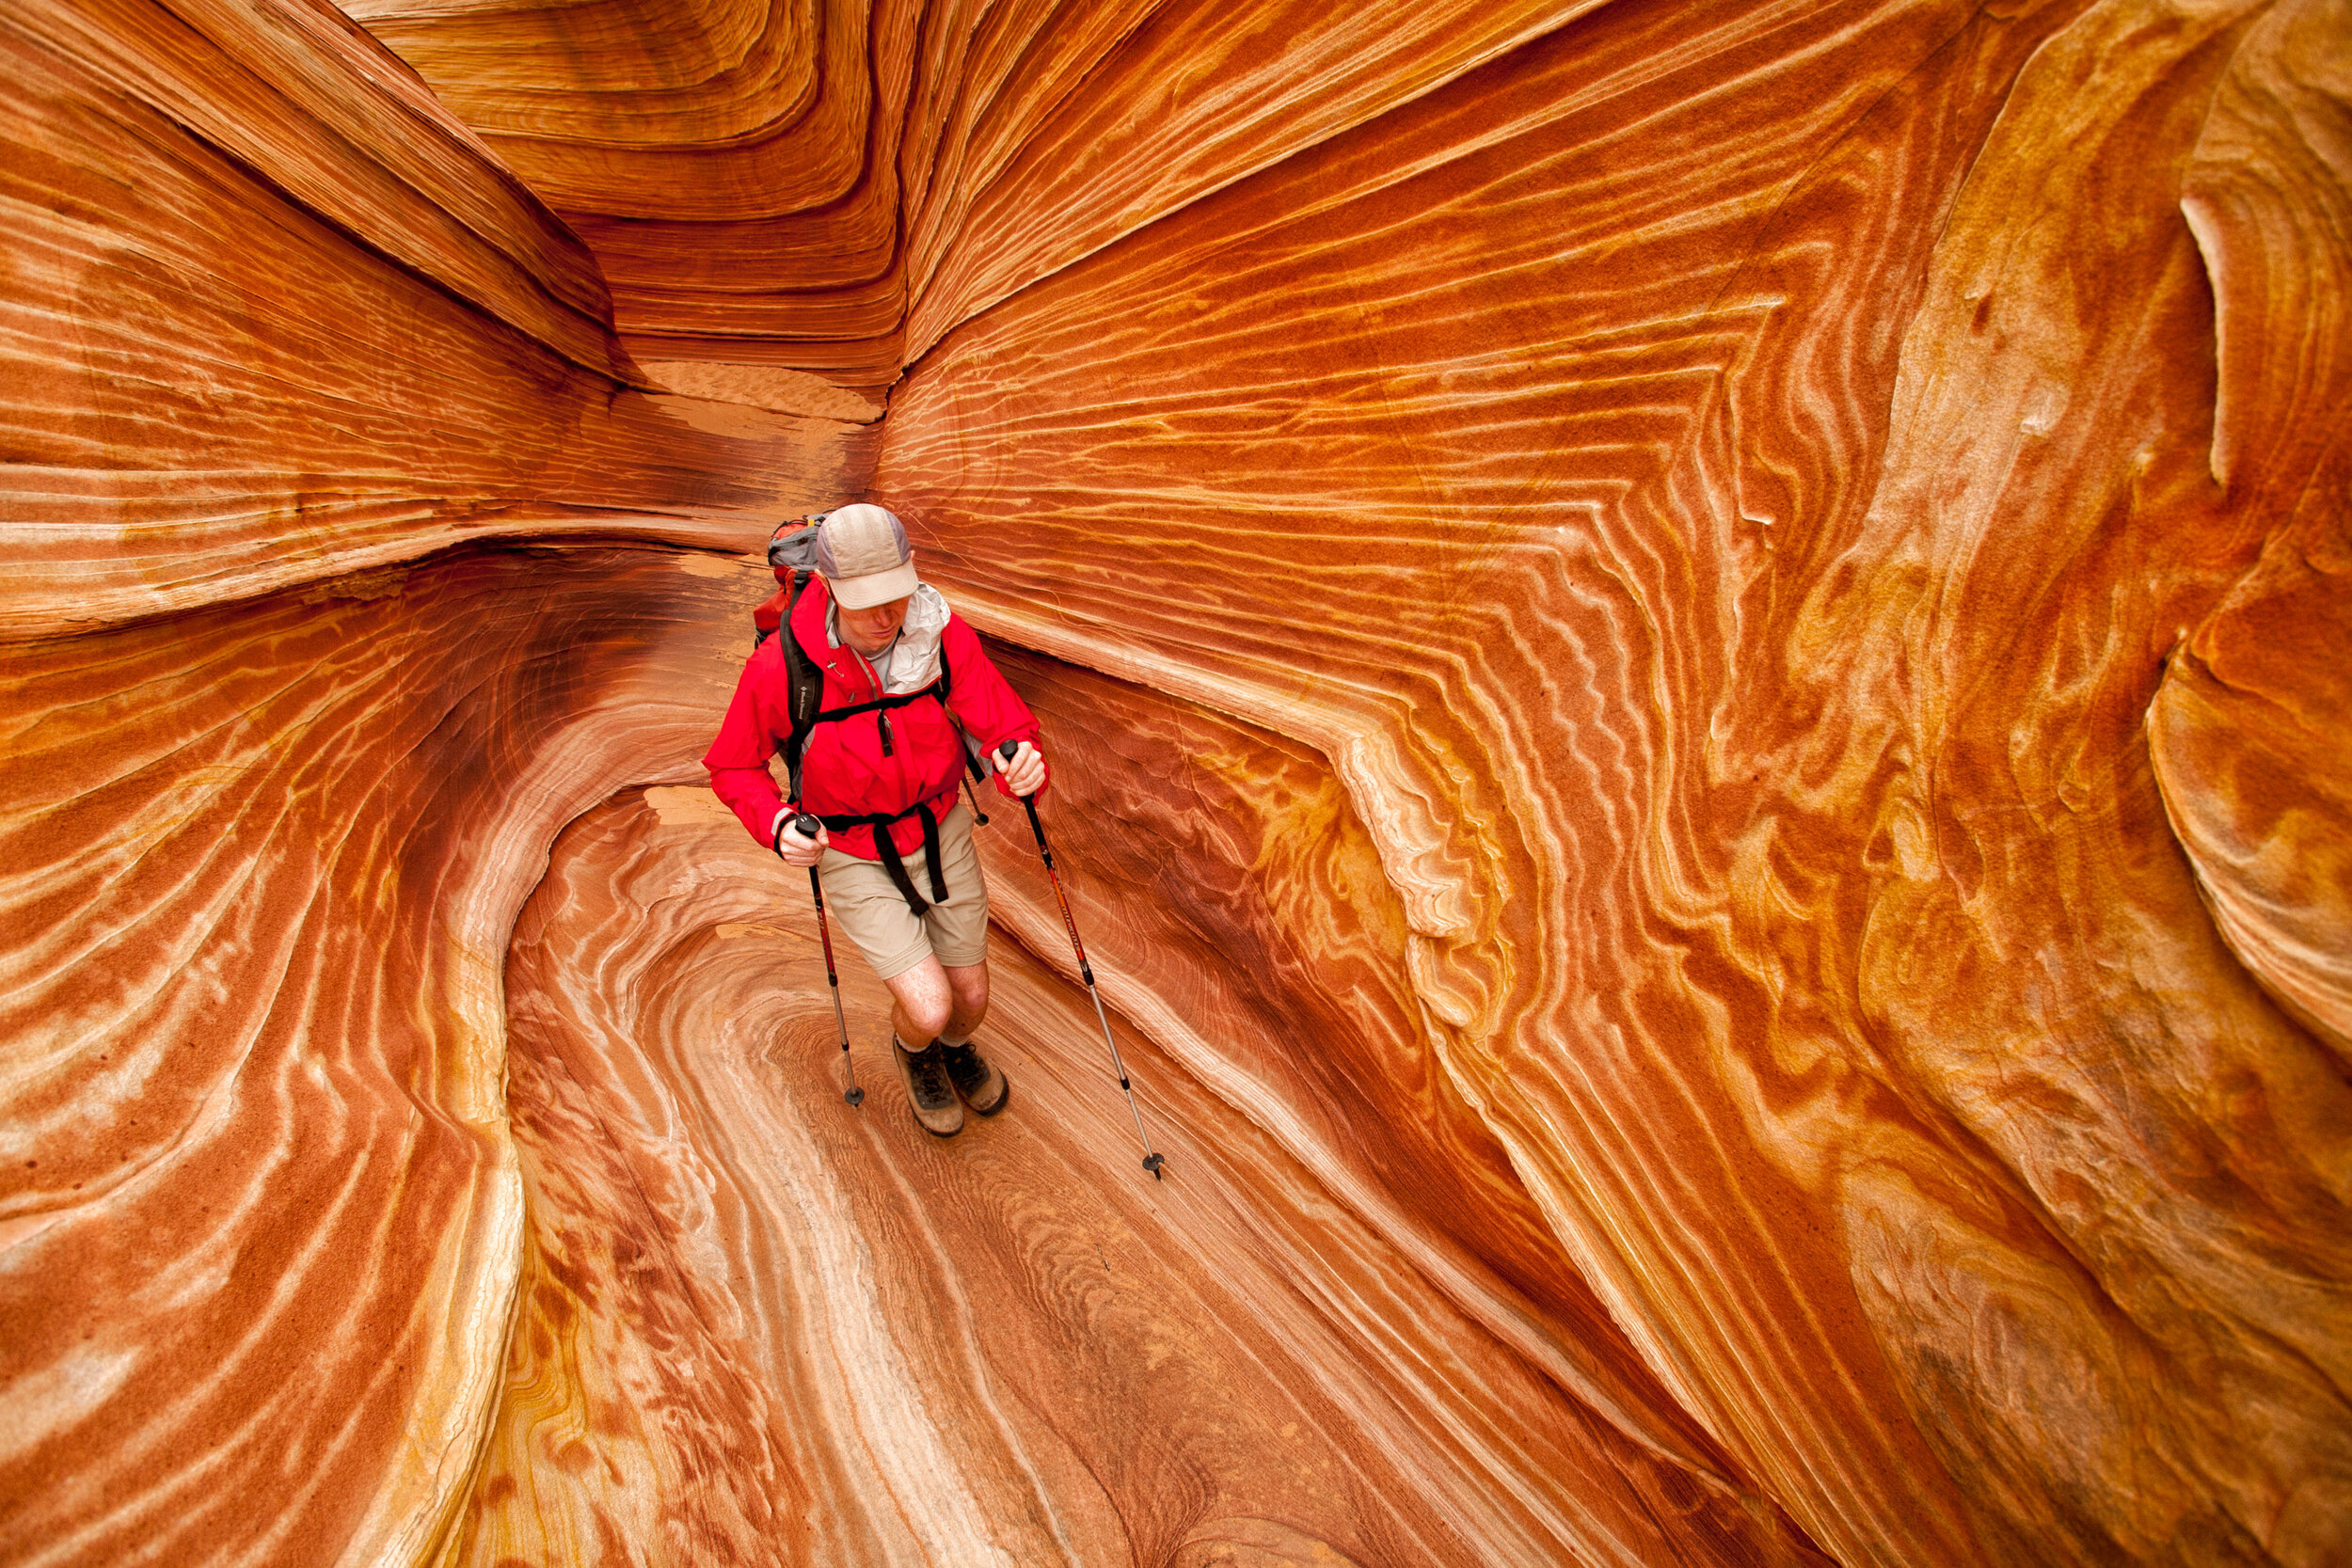  Adventure: Seth Pollack hiking in The Wave, Coyote Buttes Wilderness, Arizona 